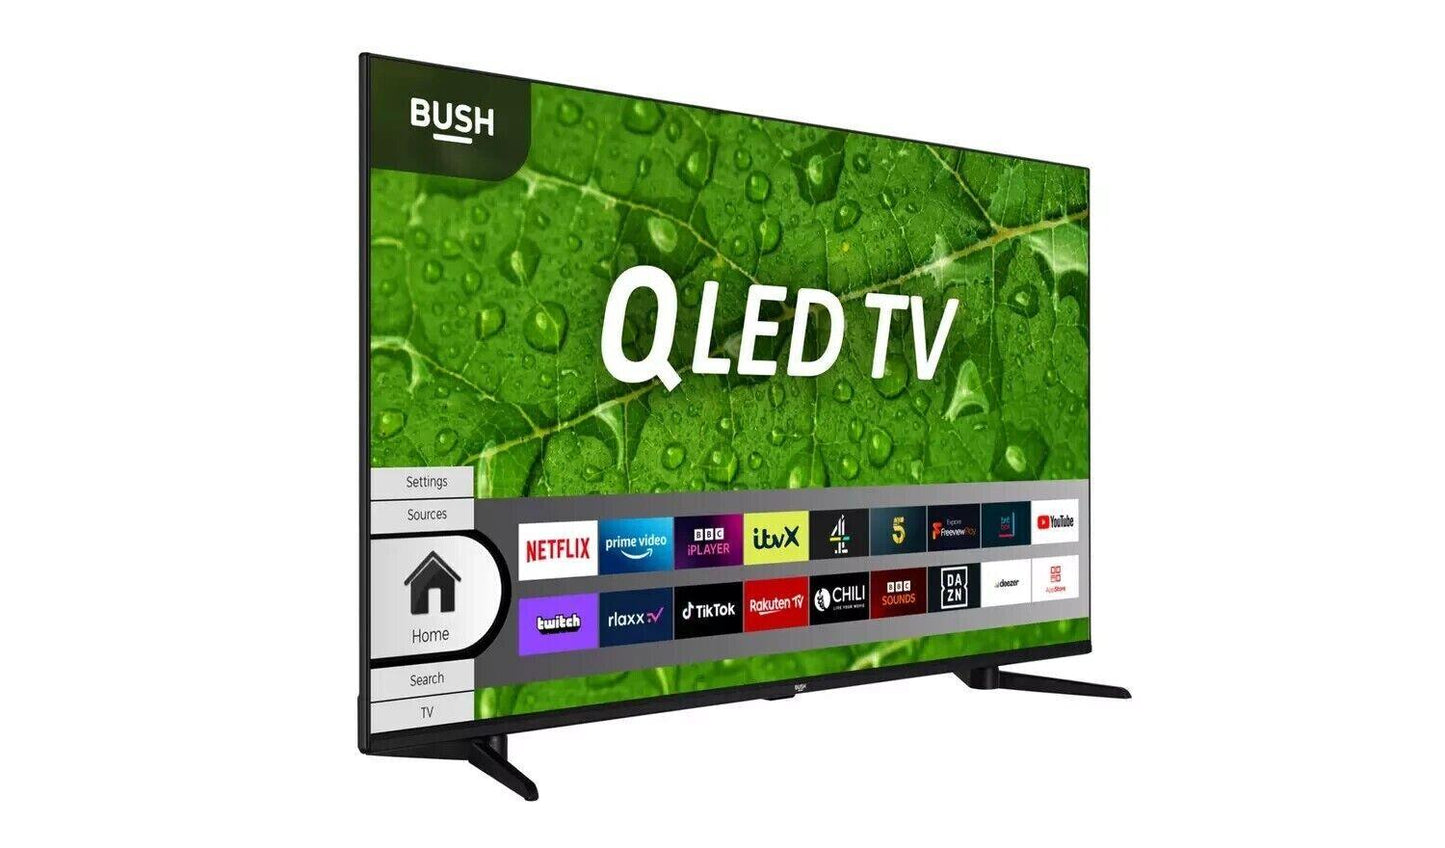 Bush 50 Inch Smart 4K UHD HDR QLED Freeview TV U COLLECTION ONLY - Smart Clear Vision